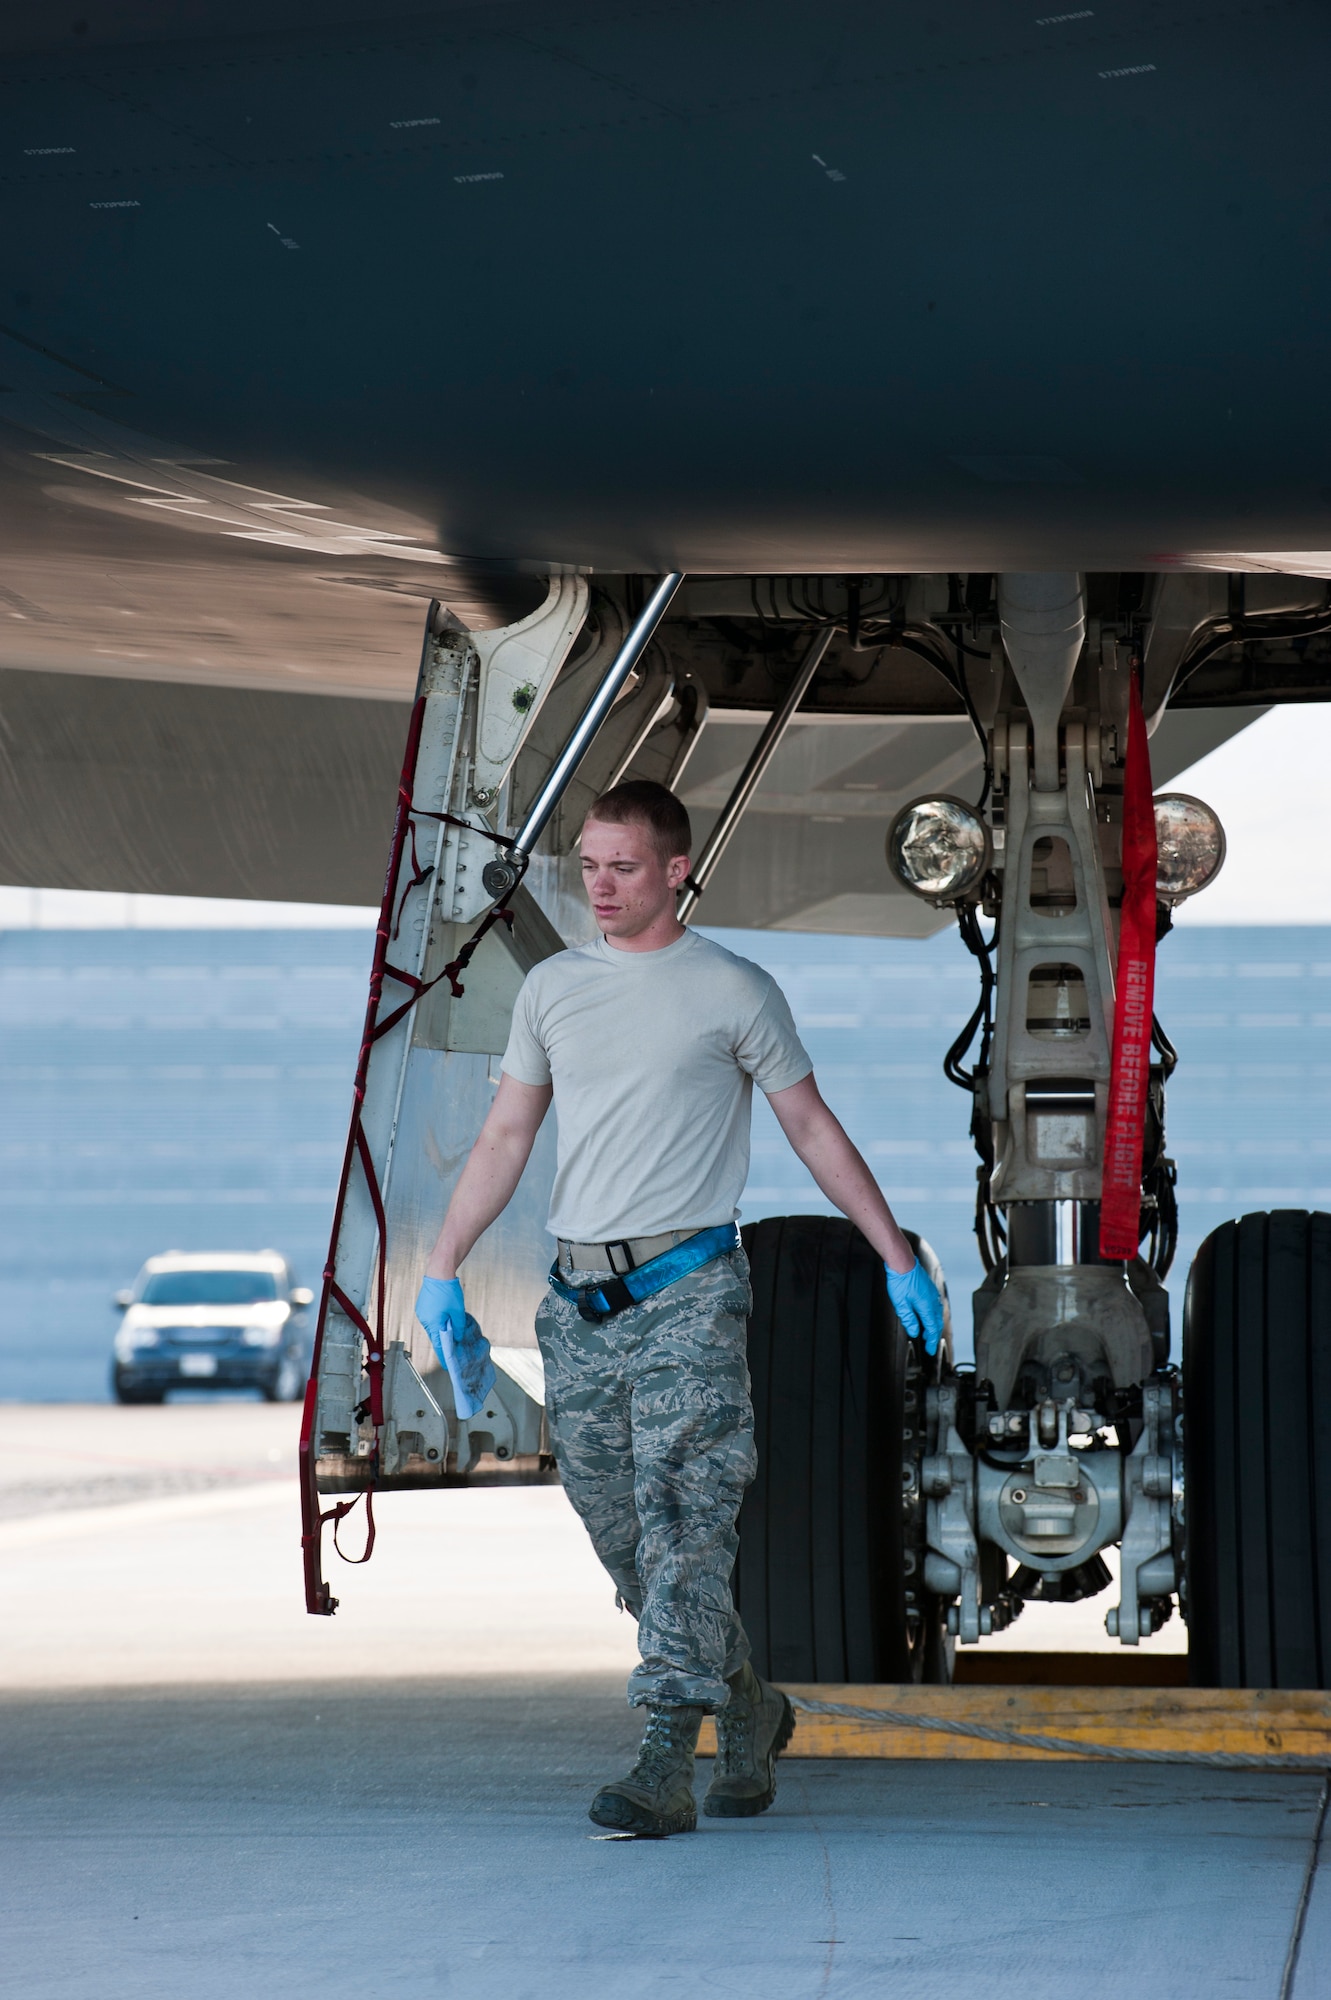 U.S. Air Force Senior Airman Dustin Childs, 509th Aircraft Maintenance Squadron crew chief from Whiteman Air Force Base, Mo., finishes cleaning the landing gear doors of a B-2 Spirit during Red Flag 14-1 Feb. 10, 2014, at Nellis AFB, Nev. The B-2 is a low-observable bomber aircraft capable of releasing conventional and nuclear ordinances. Red Flag is an exercise that gives air and ground crews from various squadrons, branches and allied nations the chance to come together and practice various combat scenarios in a controlled environment. (U.S. Air Force photo by Airman 1st Class Thomas Spangler)